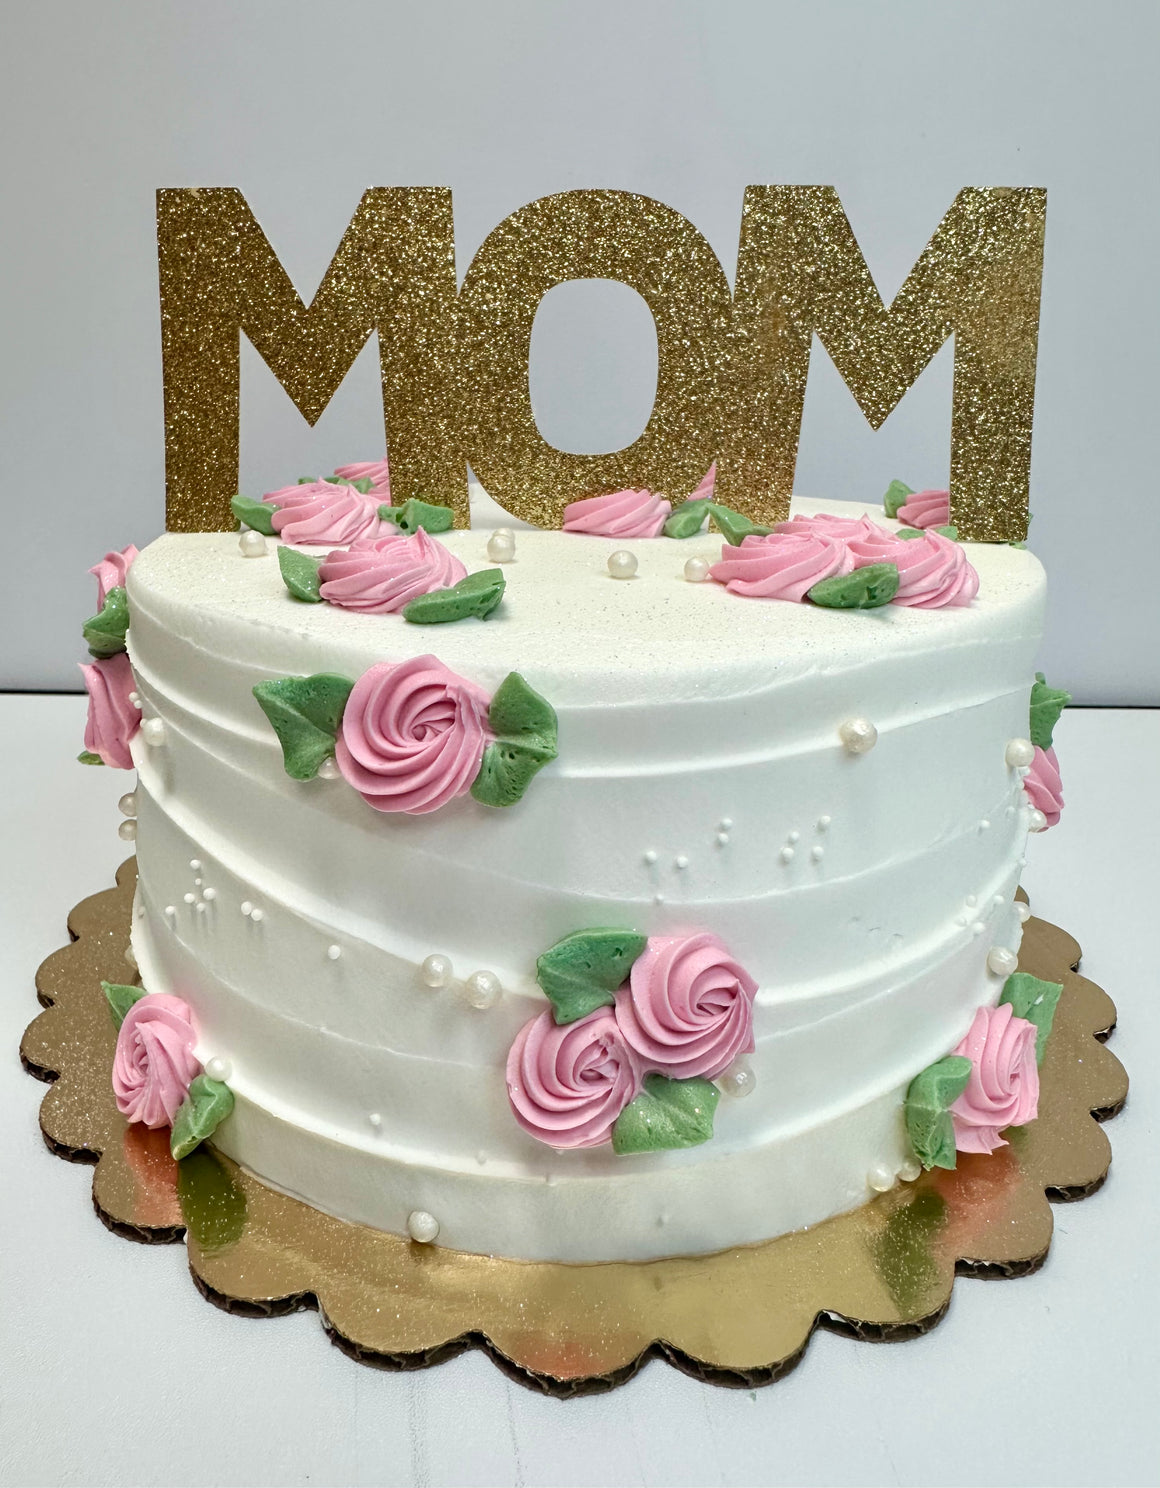 "Mother's Day Cake" Decorating Class Thurs. May 9th 5:30pm-7:00pm